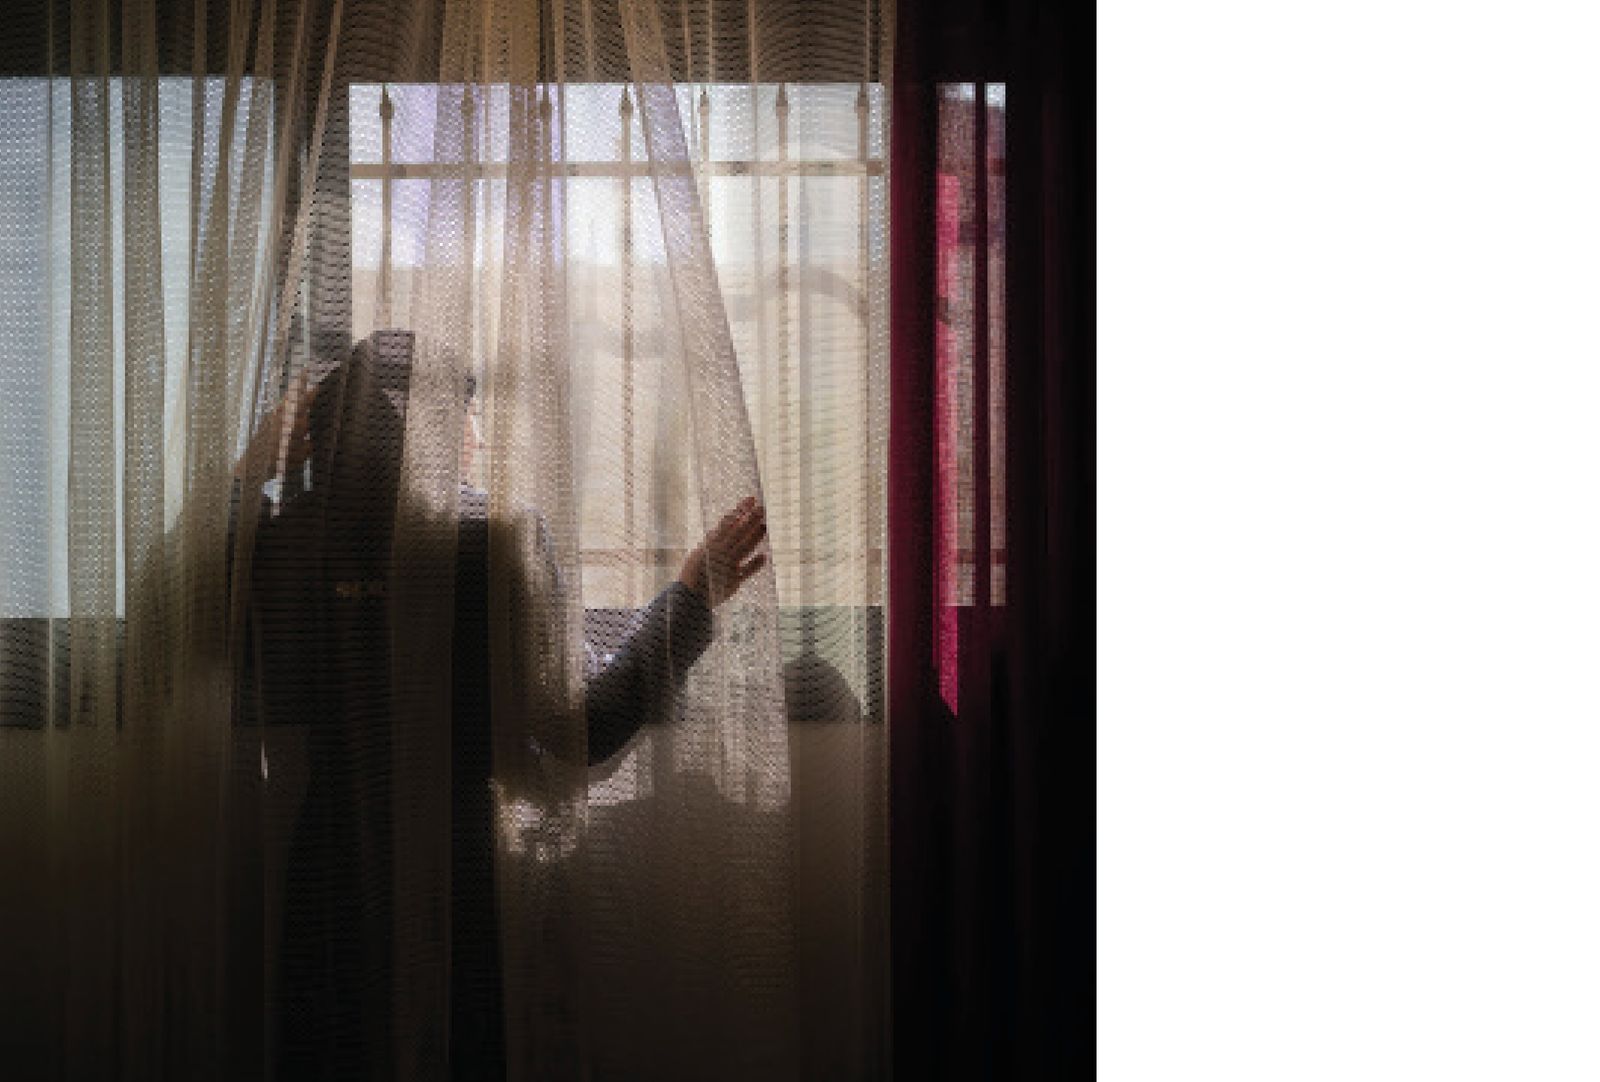 © Foto Evidence - Image from the Habibi by antonio faccilongo photography project